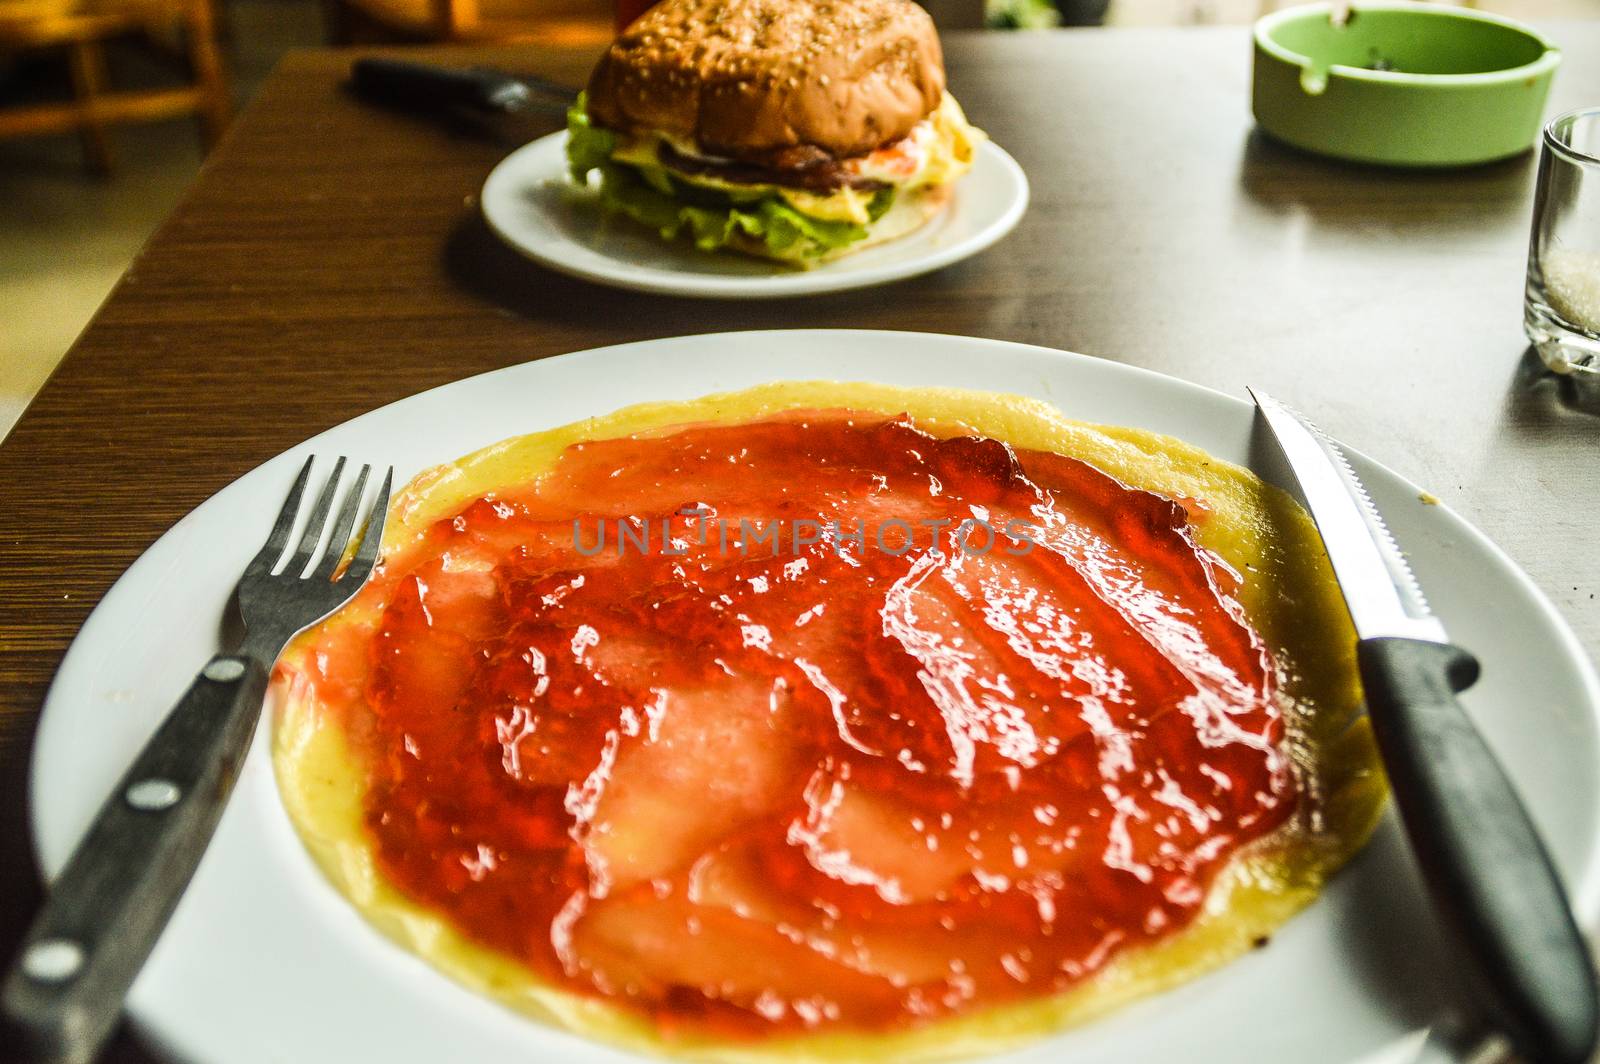 cheeseburger and pancake with jam for breakfast by Sonnet15